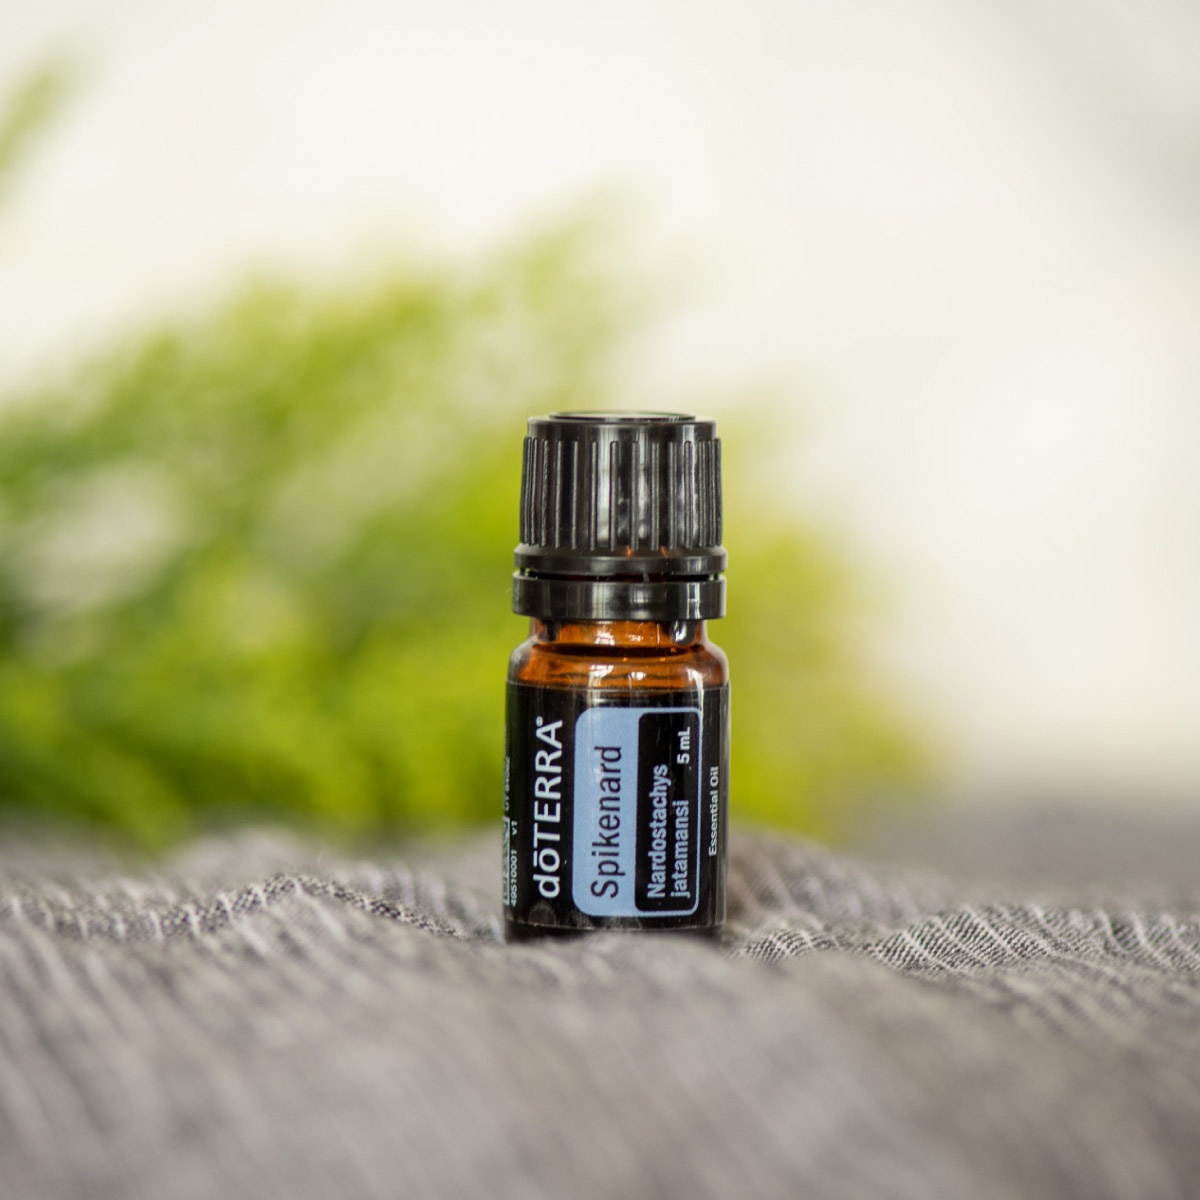 Bottle of doTERRA Spikenard essential oil with green leaves in the background. What are the benefits of Spikenard oil? Spikenard essential oil has benefits for the skin, and a tranquil aroma that can create a grounding environment.